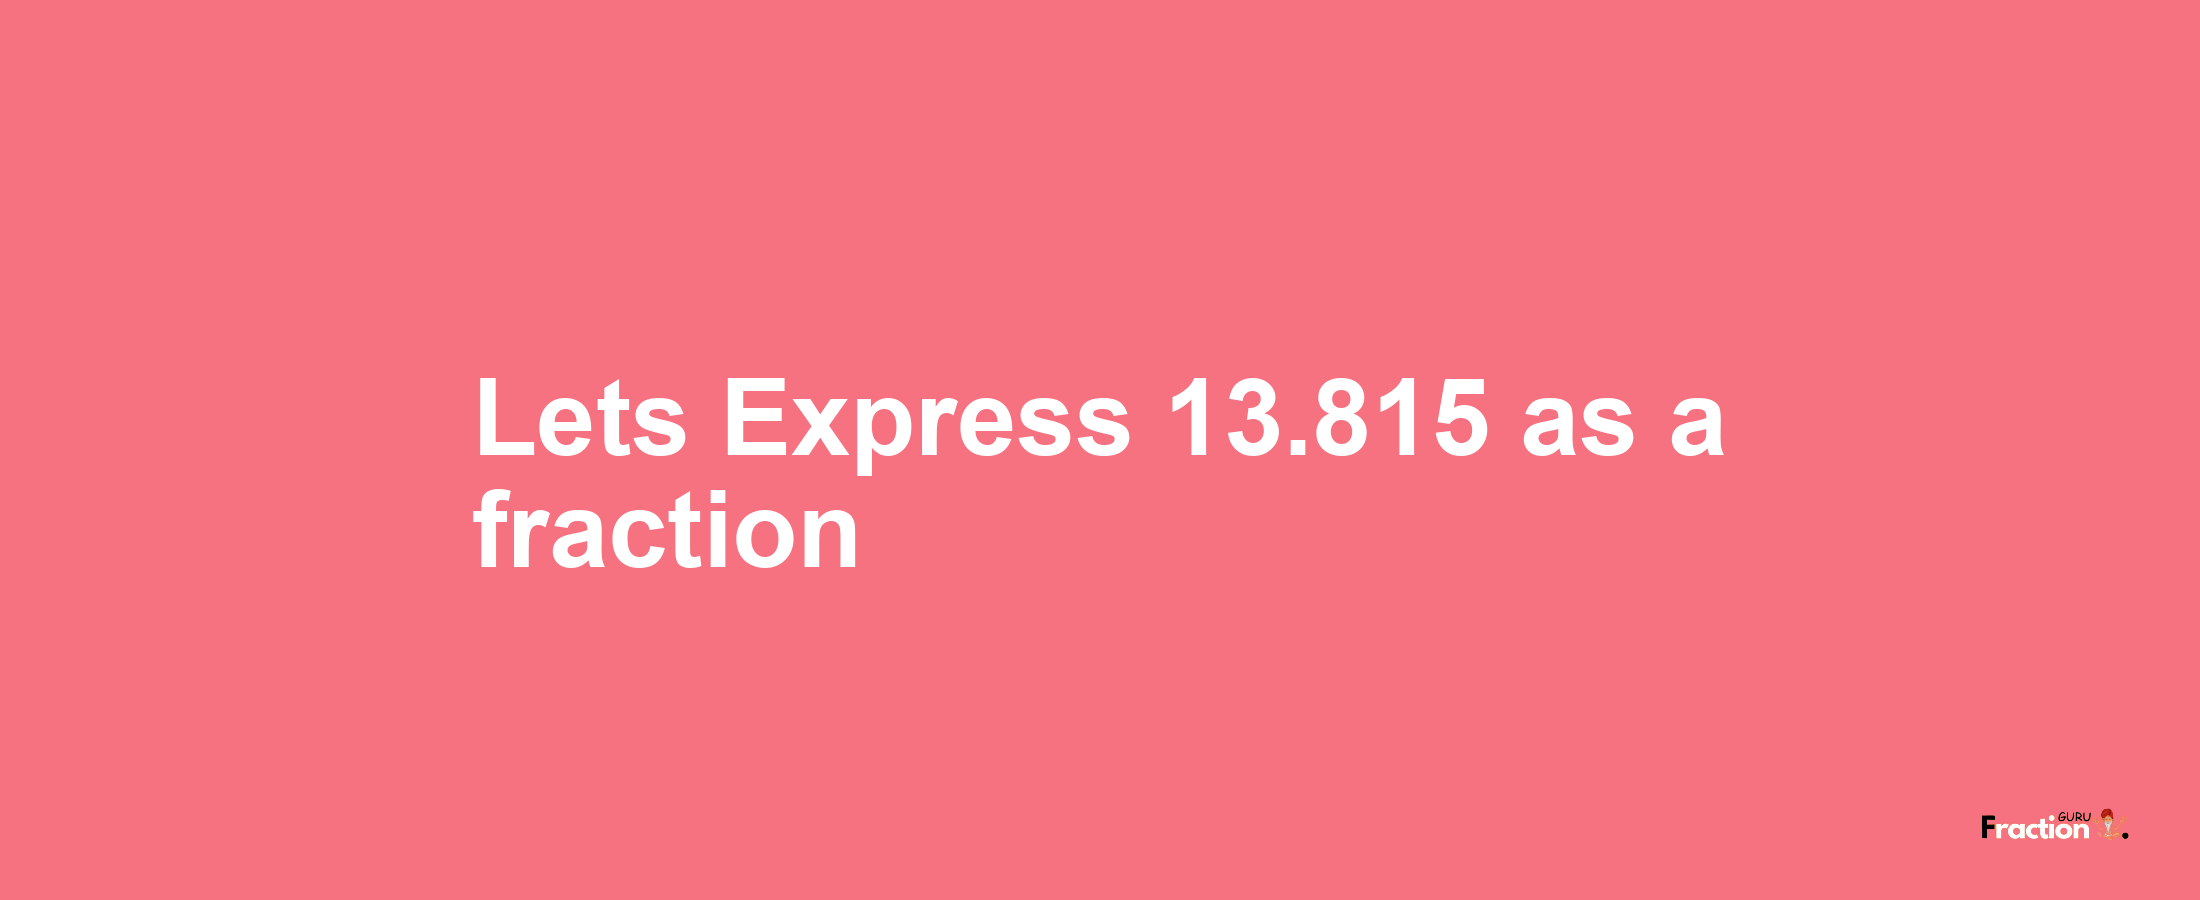 Lets Express 13.815 as afraction